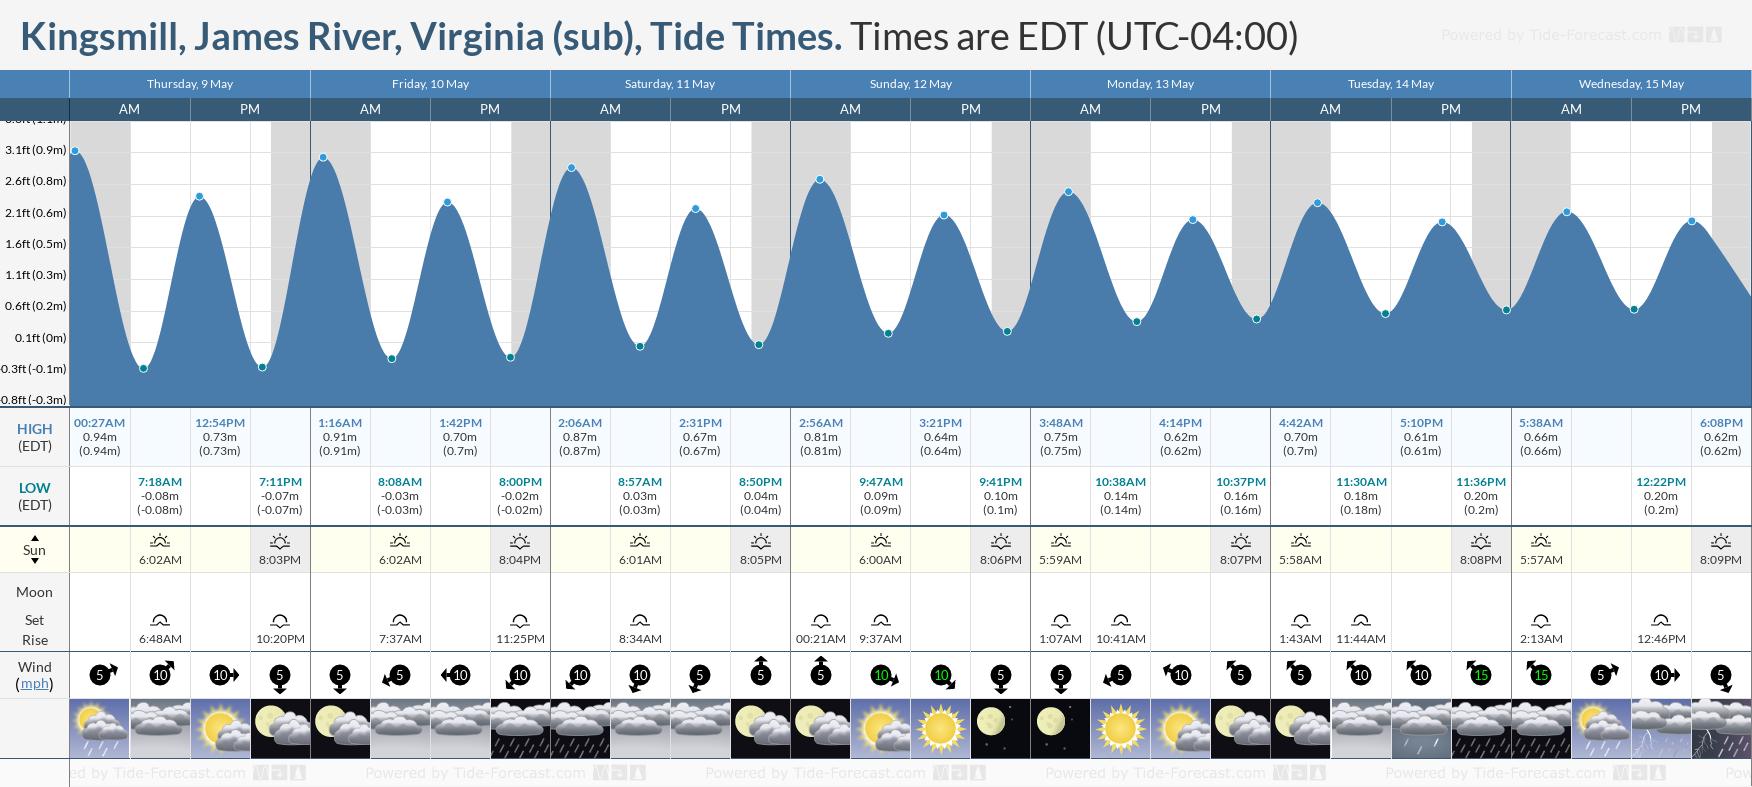 Kingsmill, James River, Virginia (sub) Tide Chart including high and low tide tide times for the next 7 days